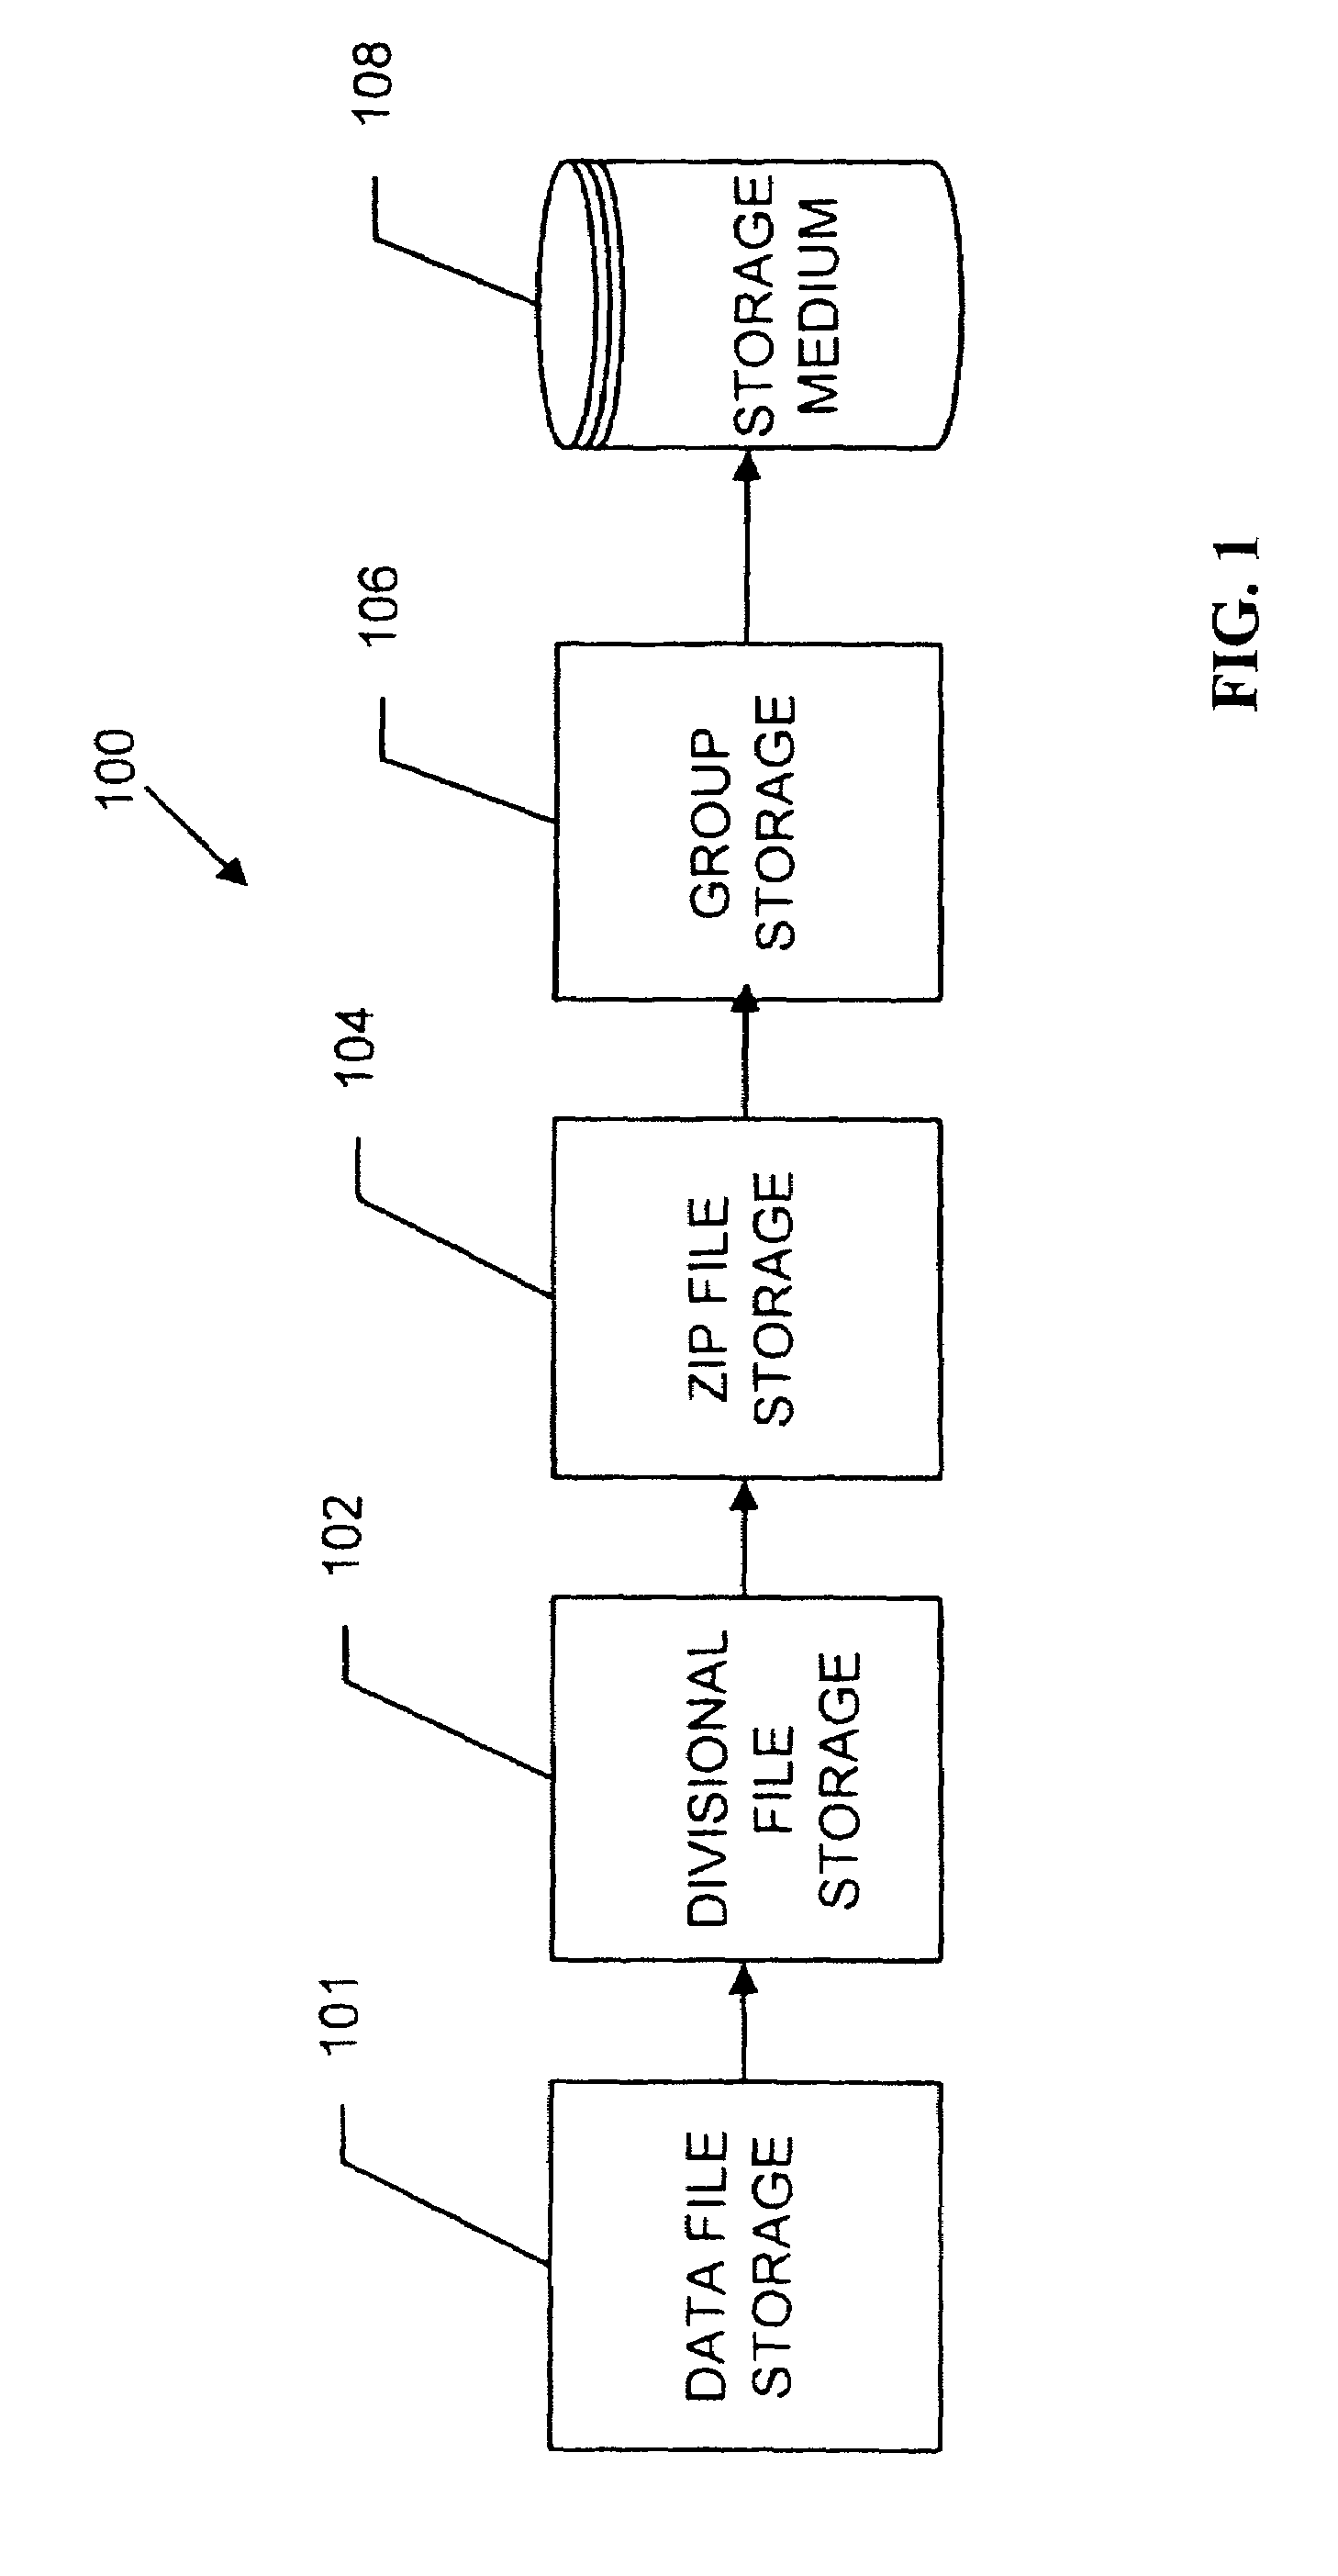 System and method for self-recovering real-time data-feed compression and archiving